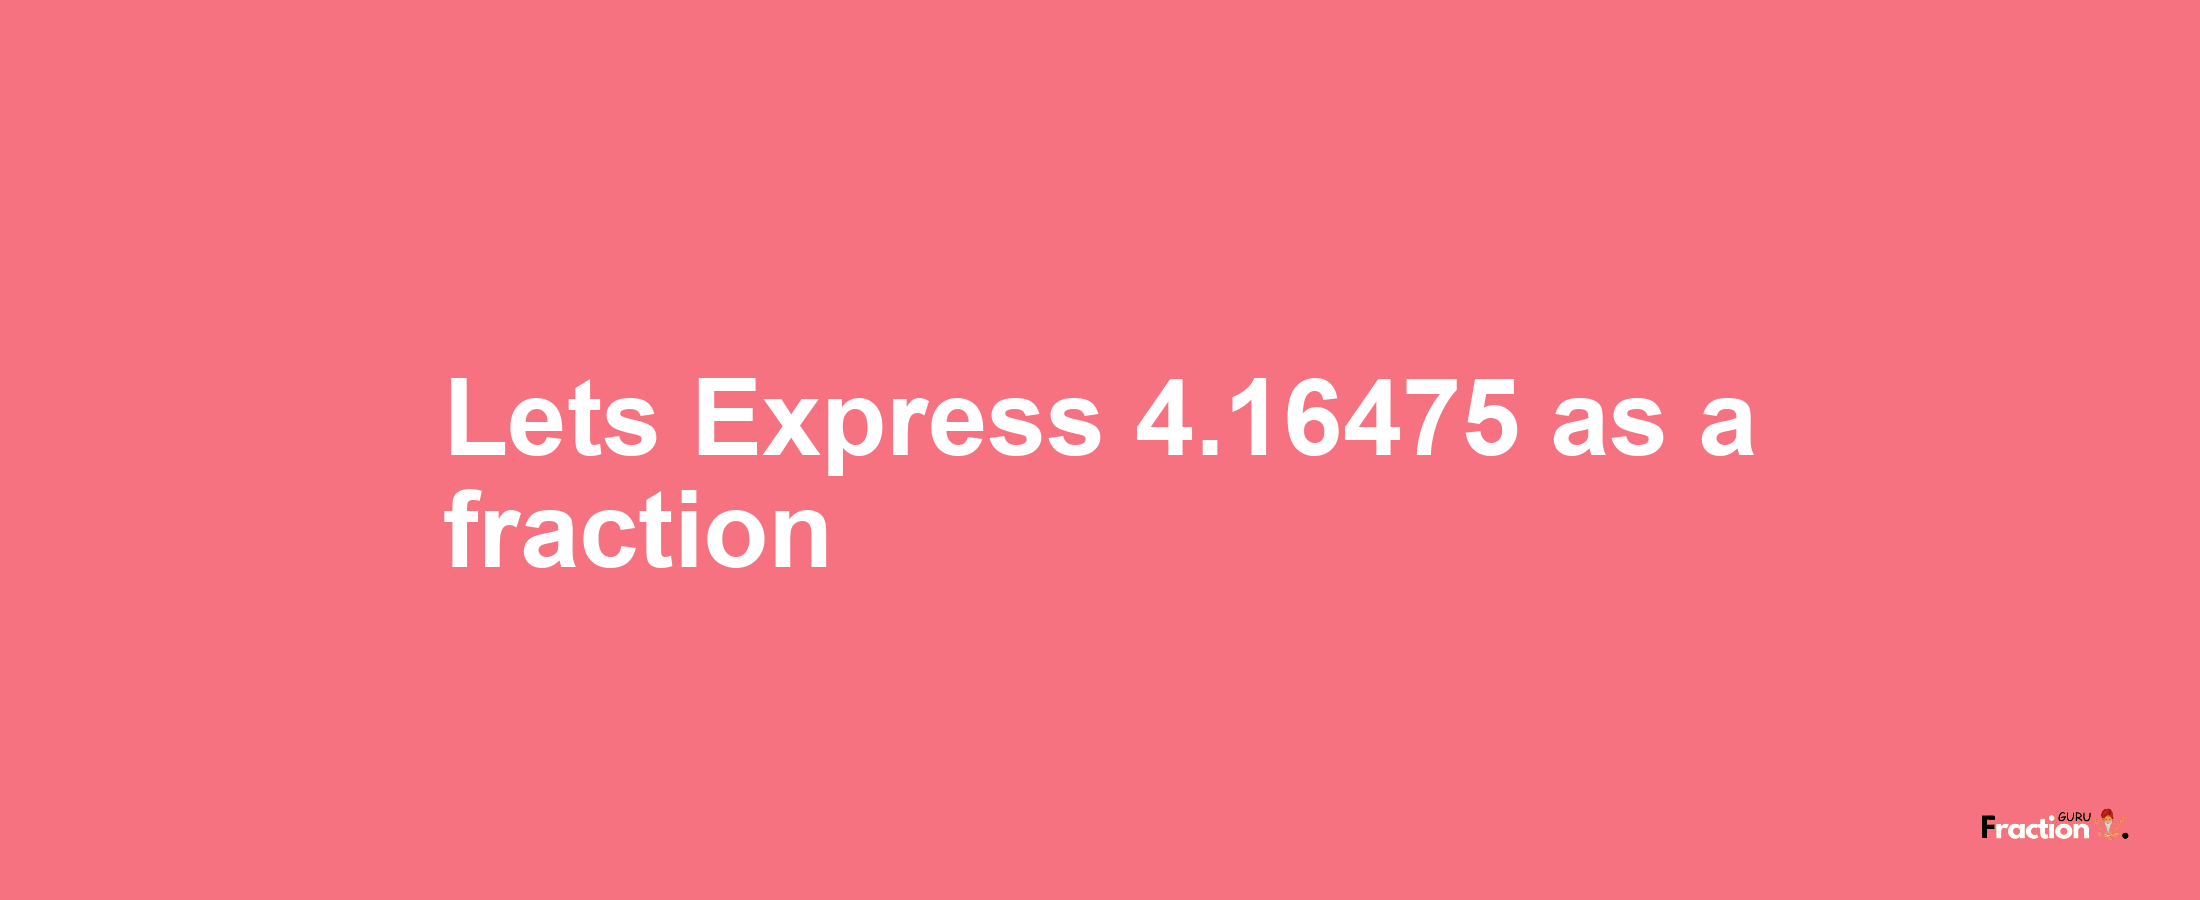 Lets Express 4.16475 as afraction